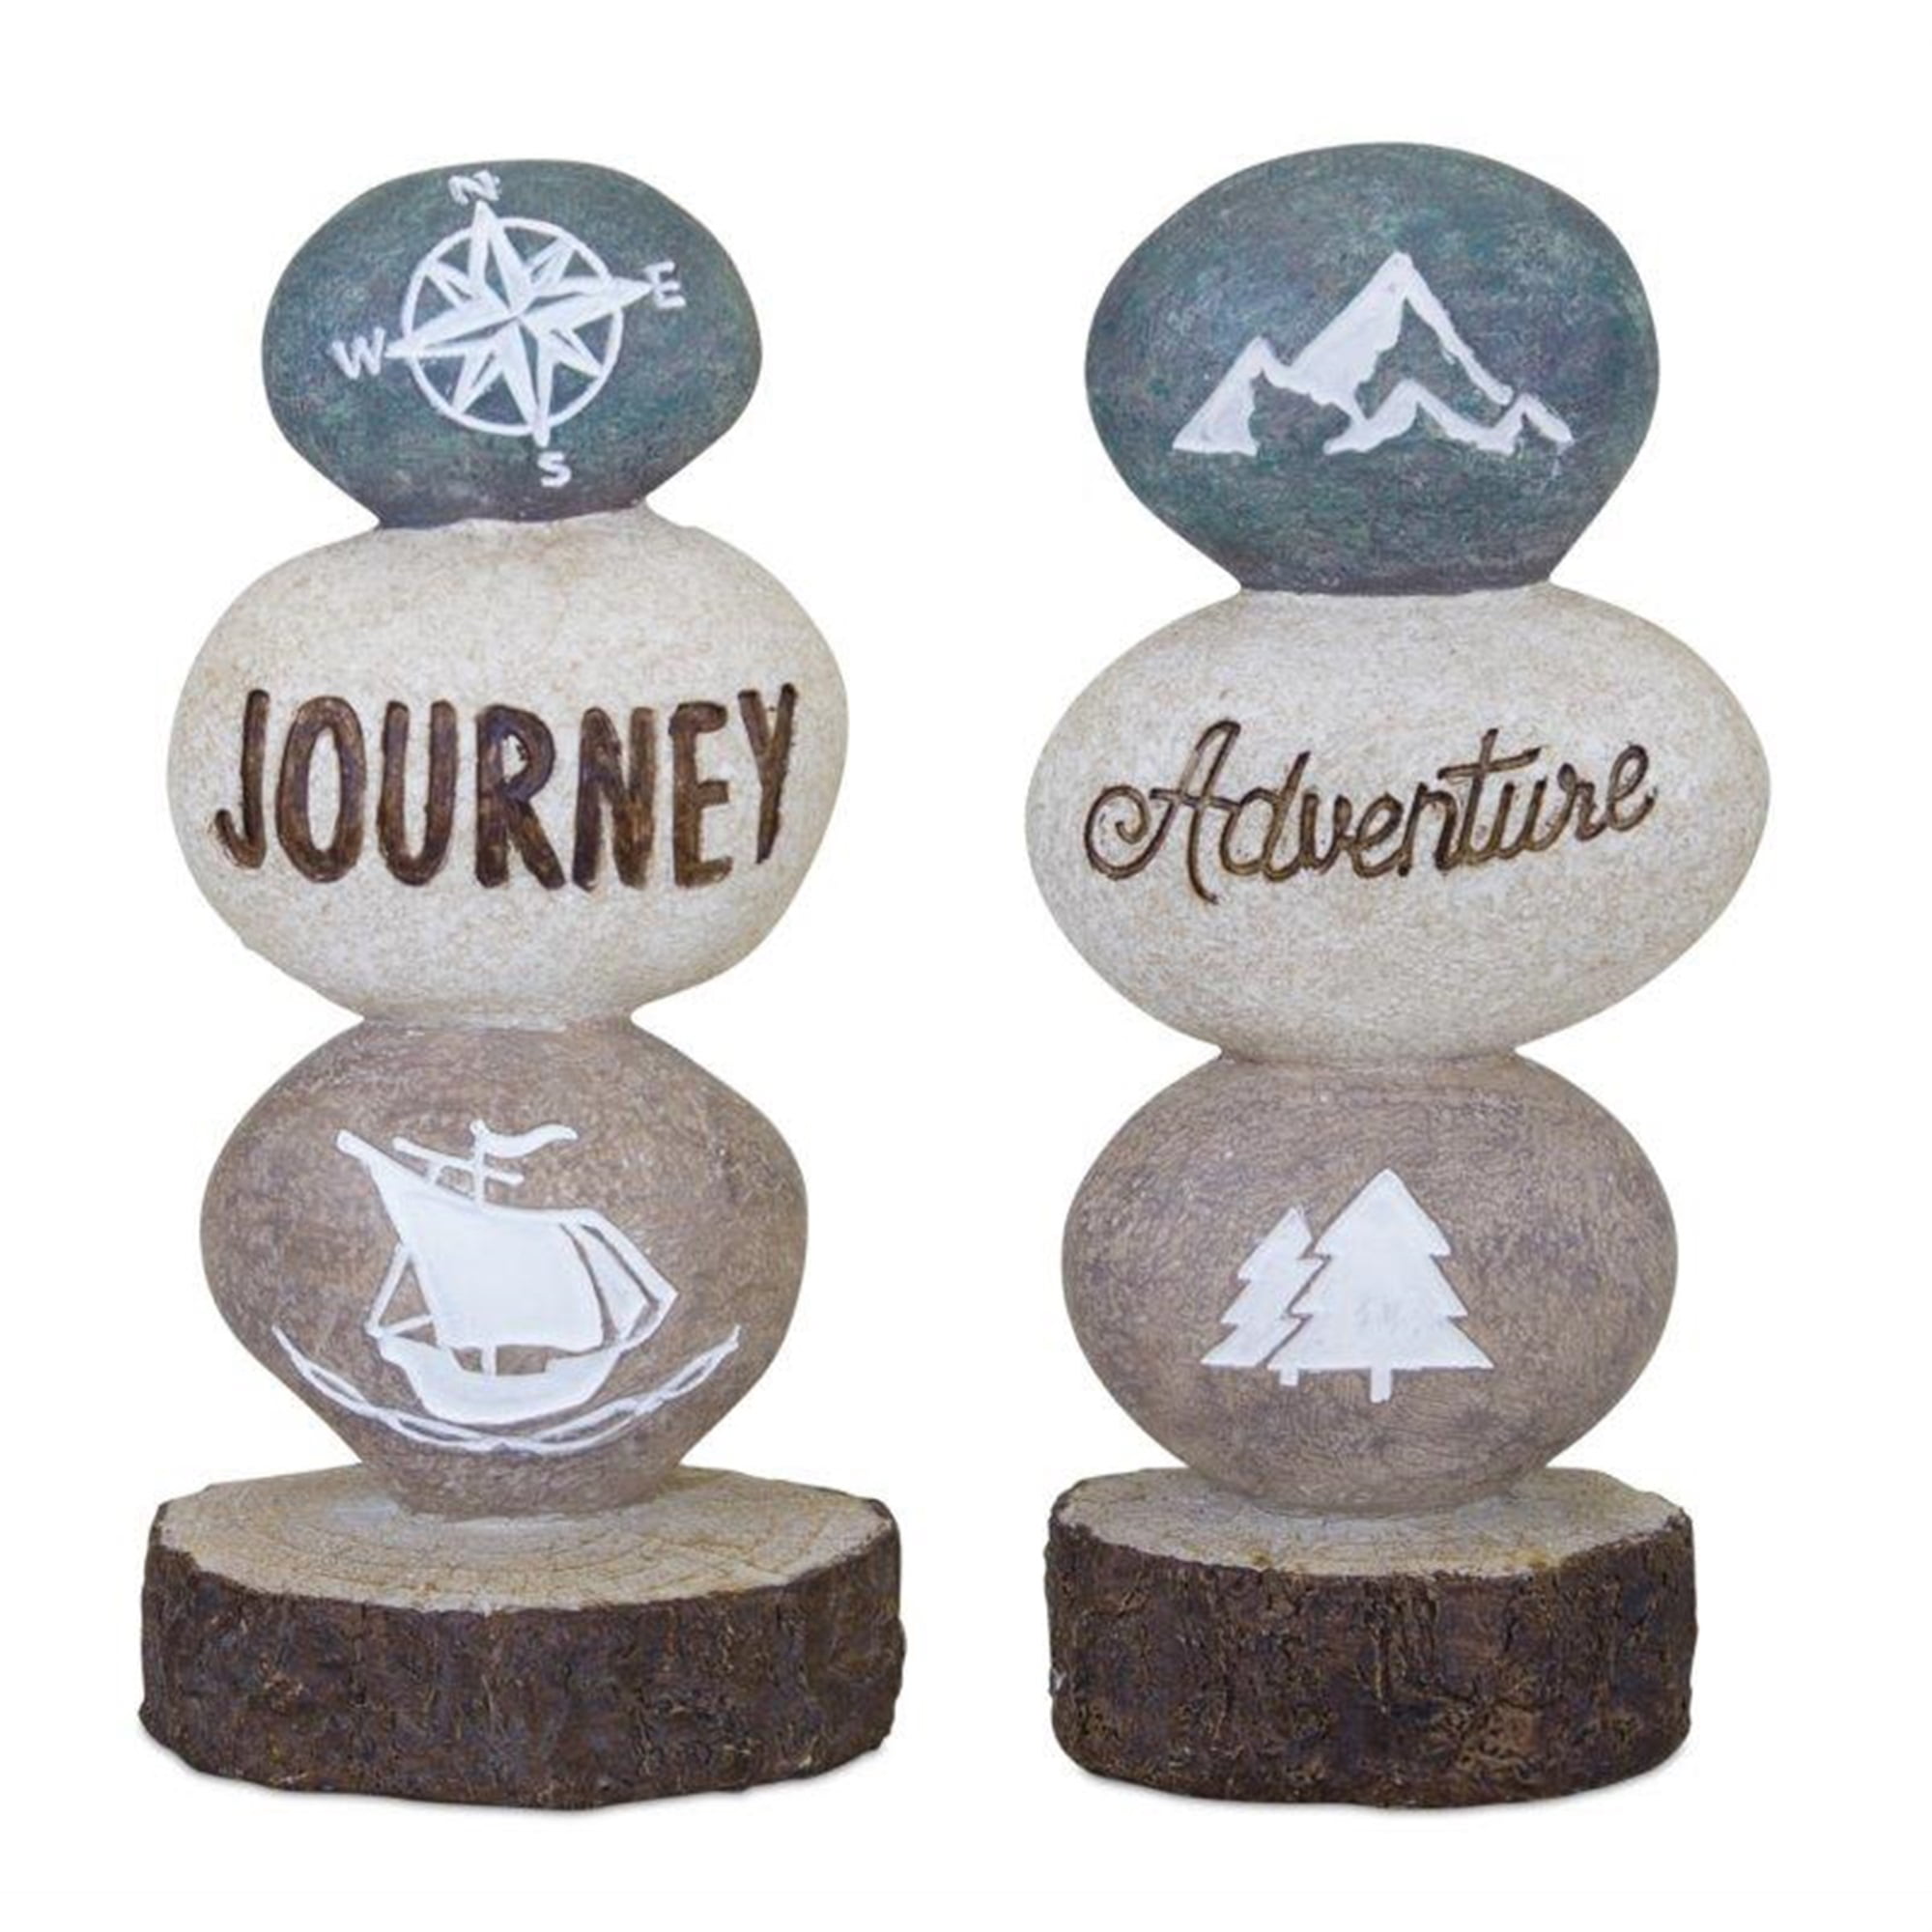 Journey and Adventure Rock Stack (Set of 2) 4"L x 8"H, 4"L x 8.75"H Resin